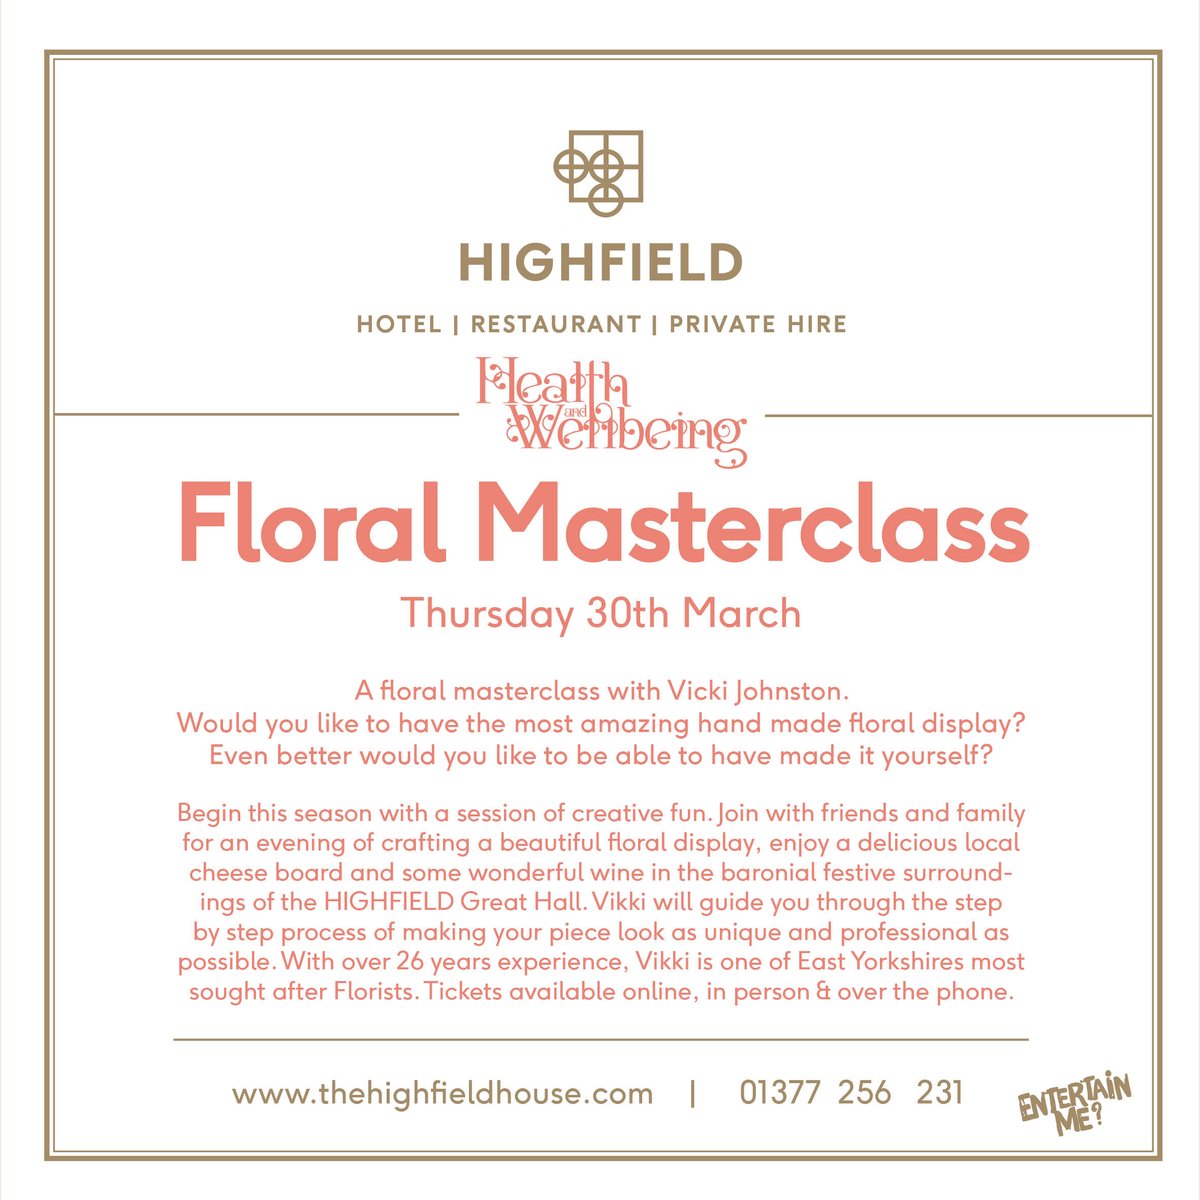 A floral masterclass with Vicki Johnston. Would you like to have the most amazing hand made floral display? Even better would you like to be able to have made it yourself?